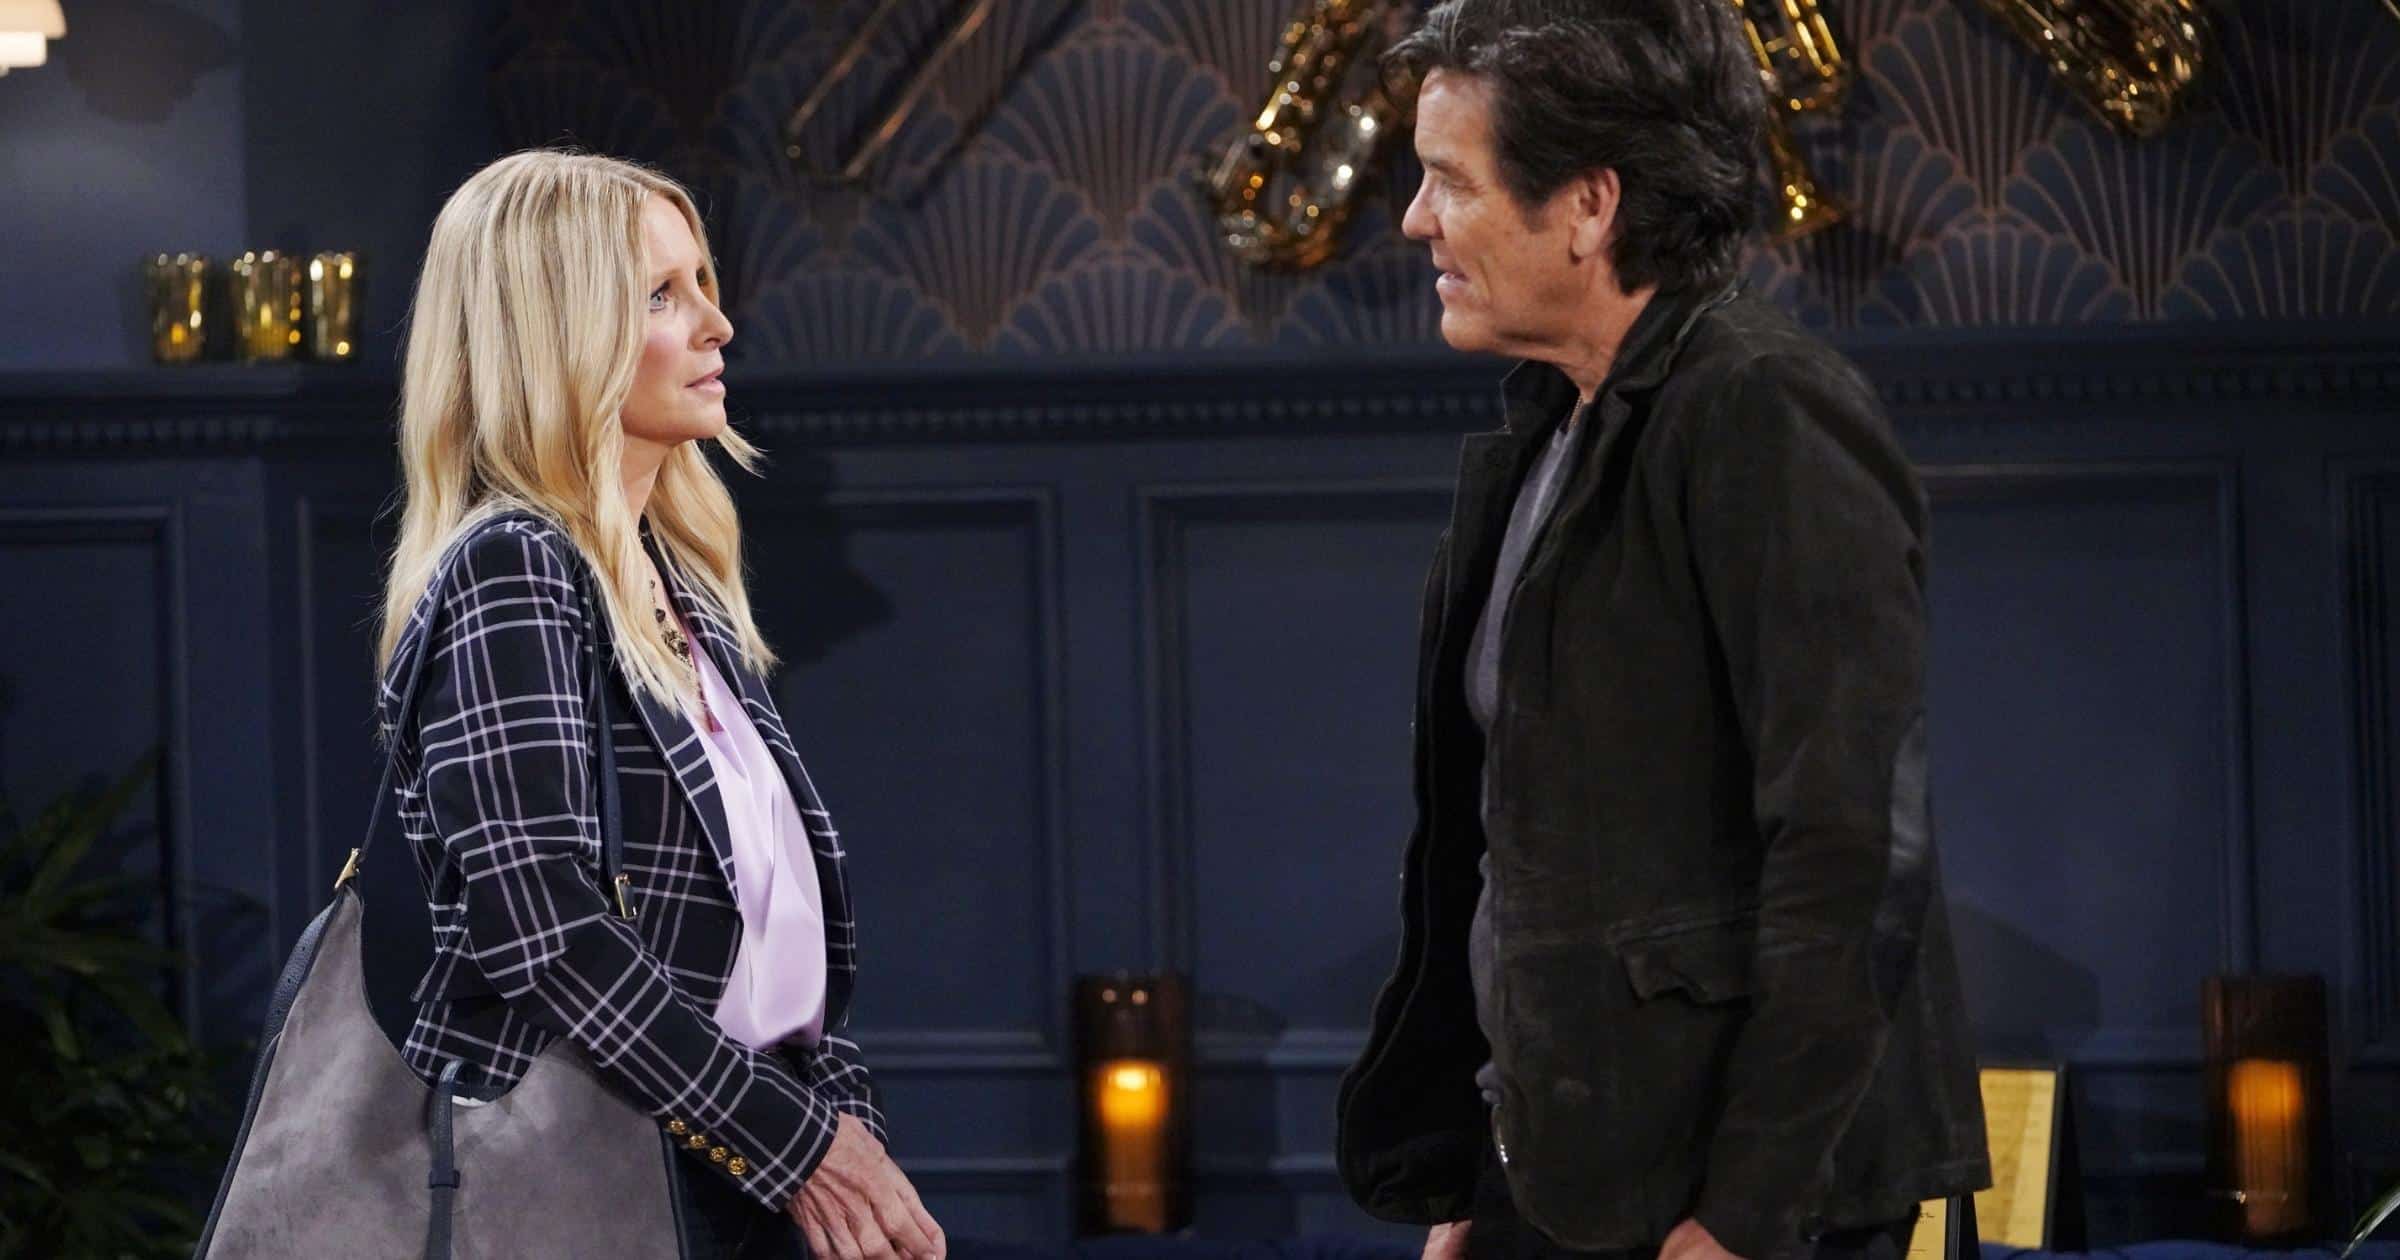 The Young and the Restless - Nov 2 - Christine and Danny